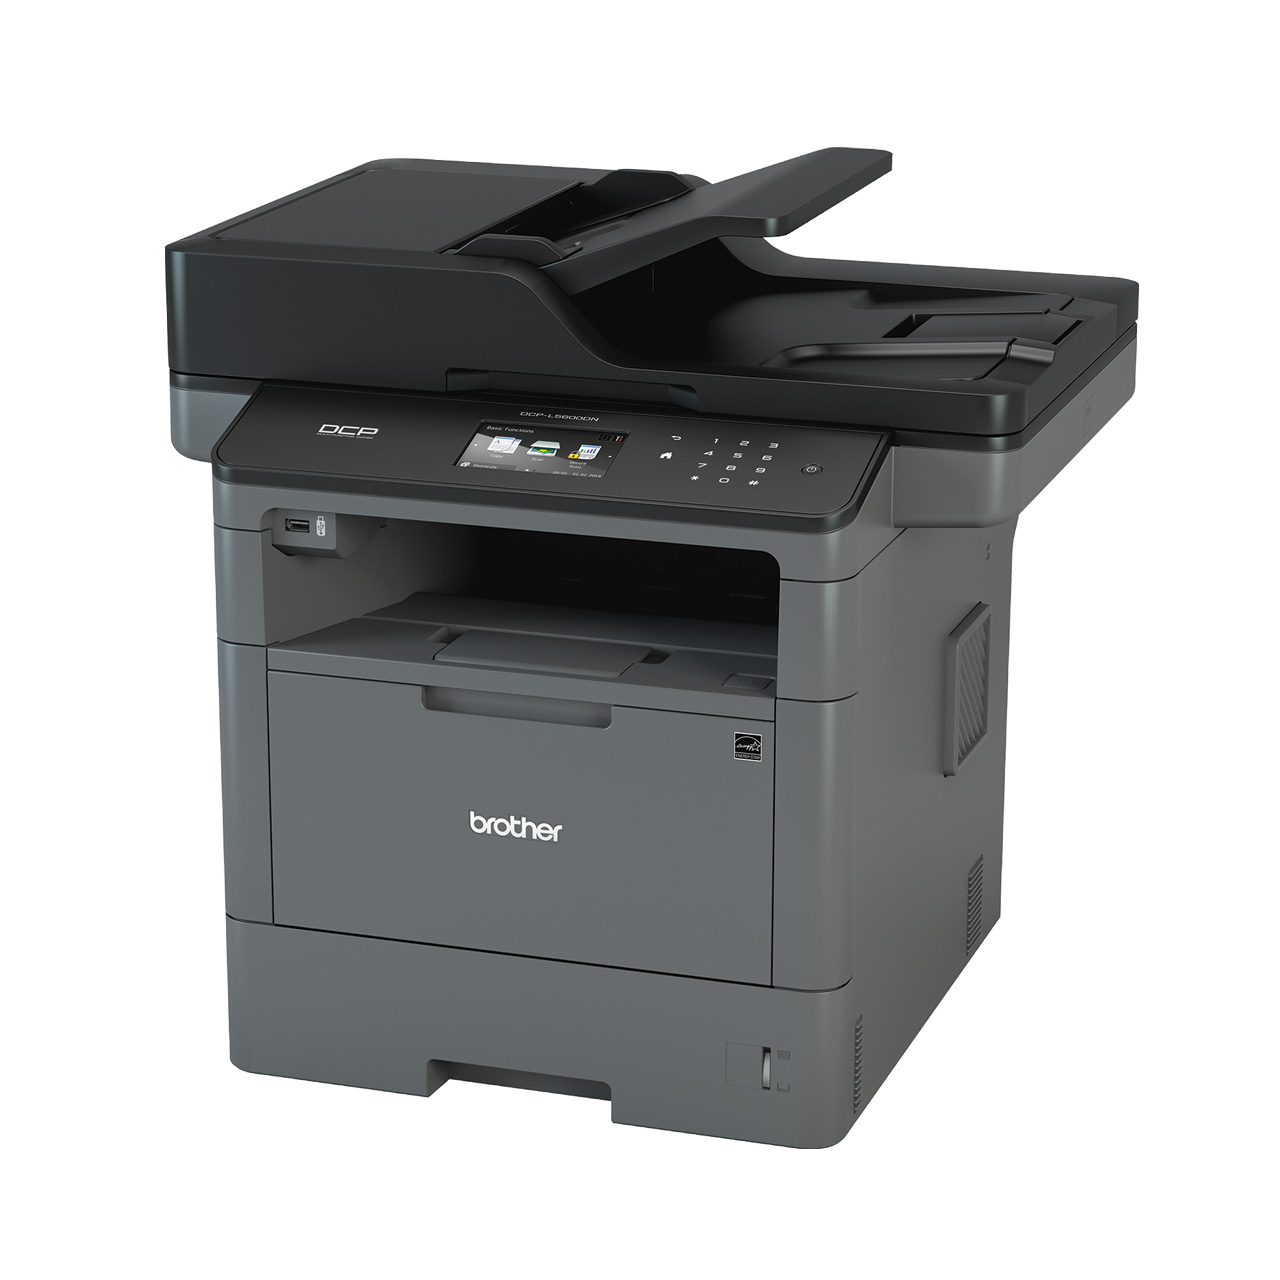 Brother Monocrom Laser Multi-Function Printer DCP-L5600DN Print, Scan, Copy, 40 PPM, 512 MB Memory, 70 Sheets ADF & Duplex, Wired Network, Legal size flatbed Scan